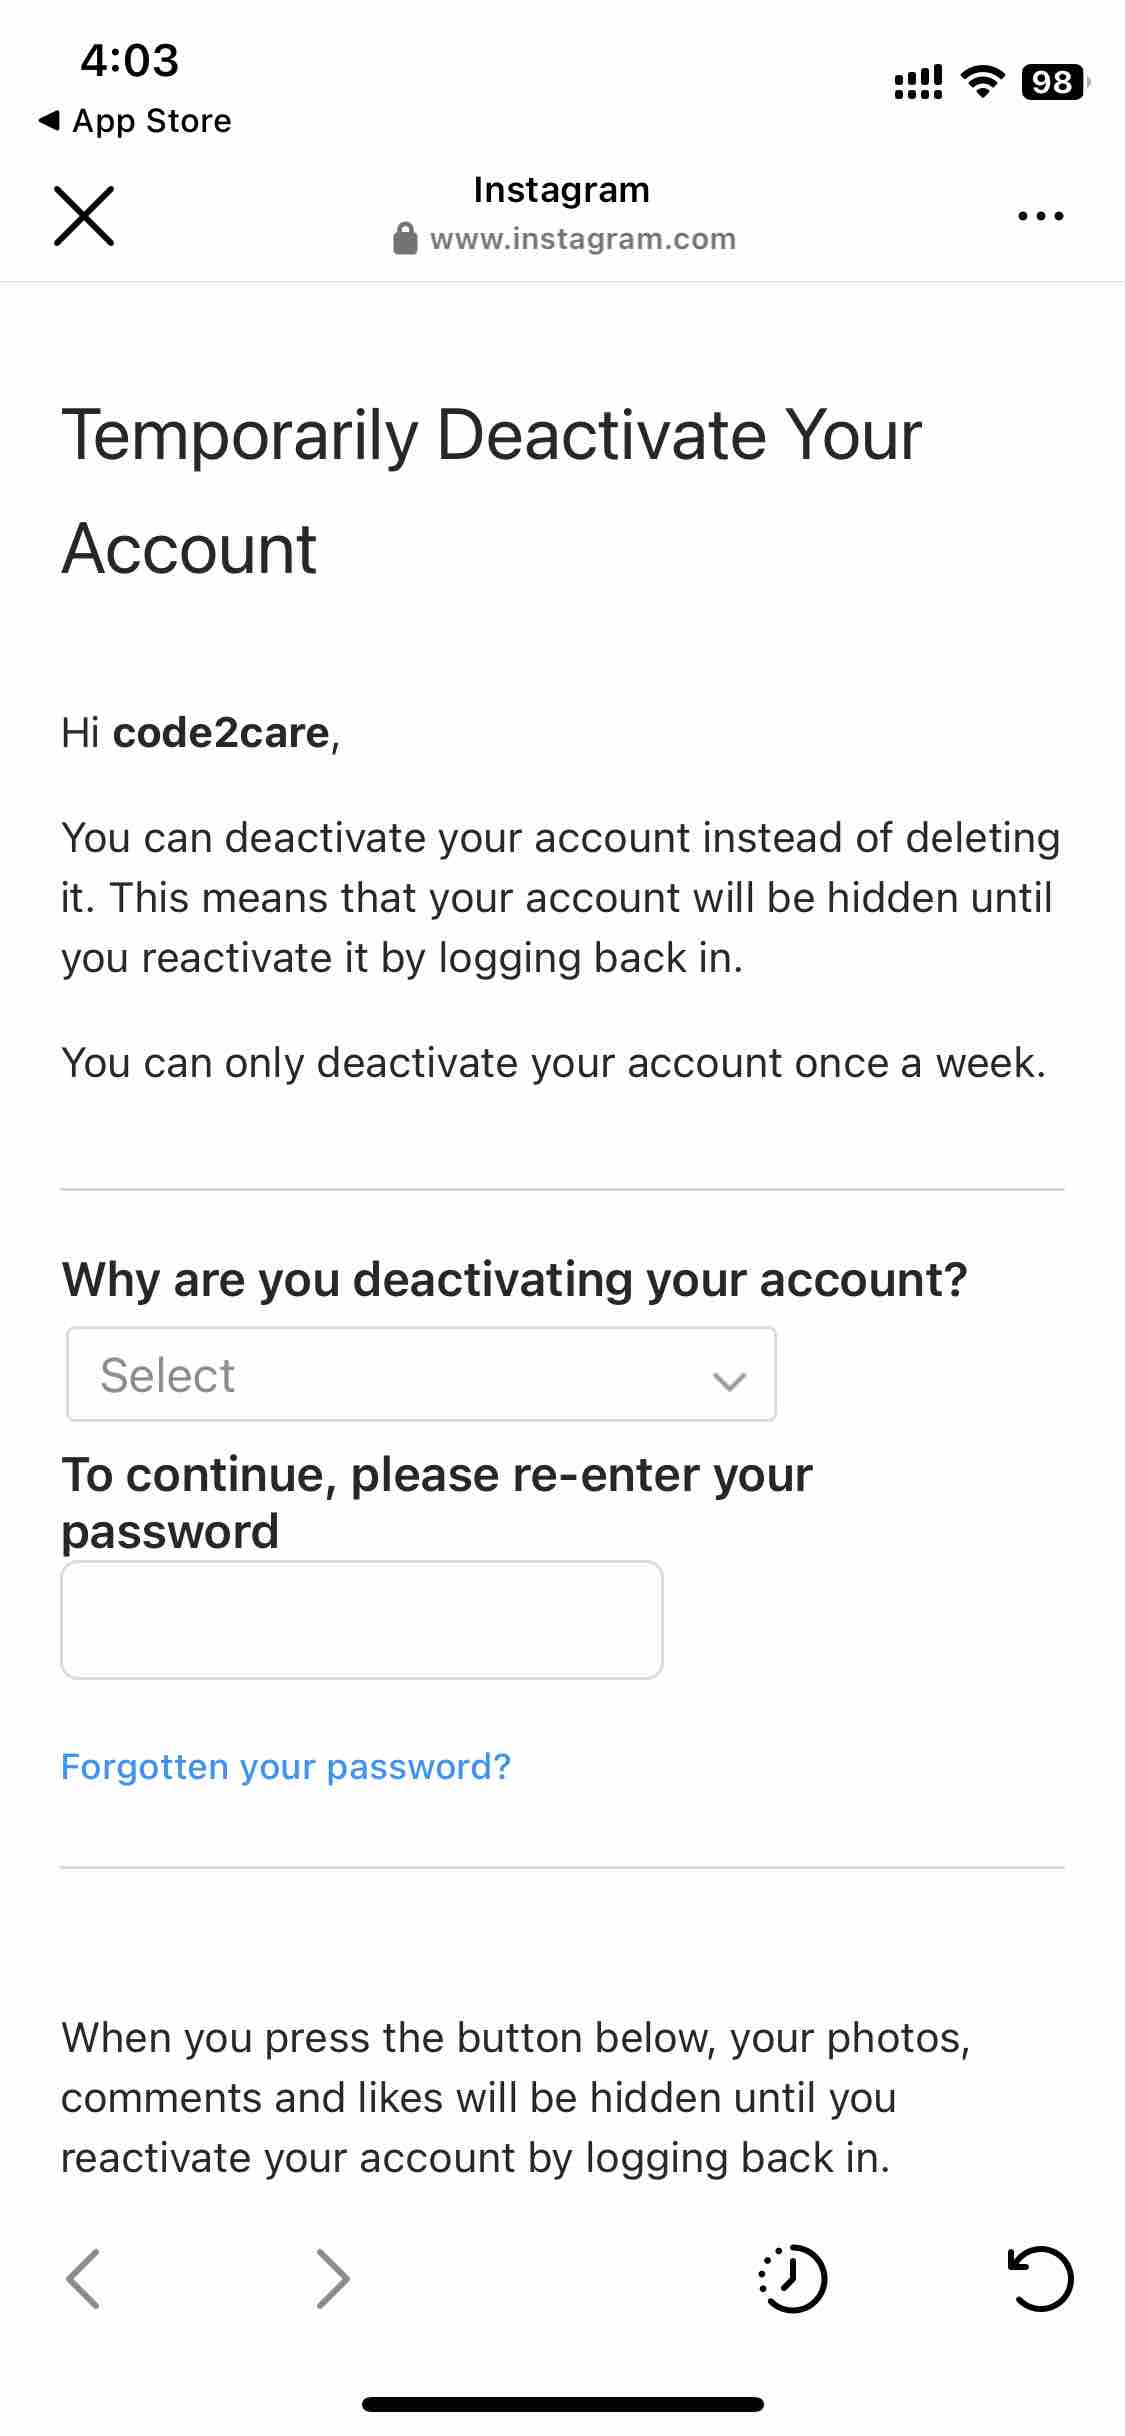 Fill in the Instagram Account Deactivation form